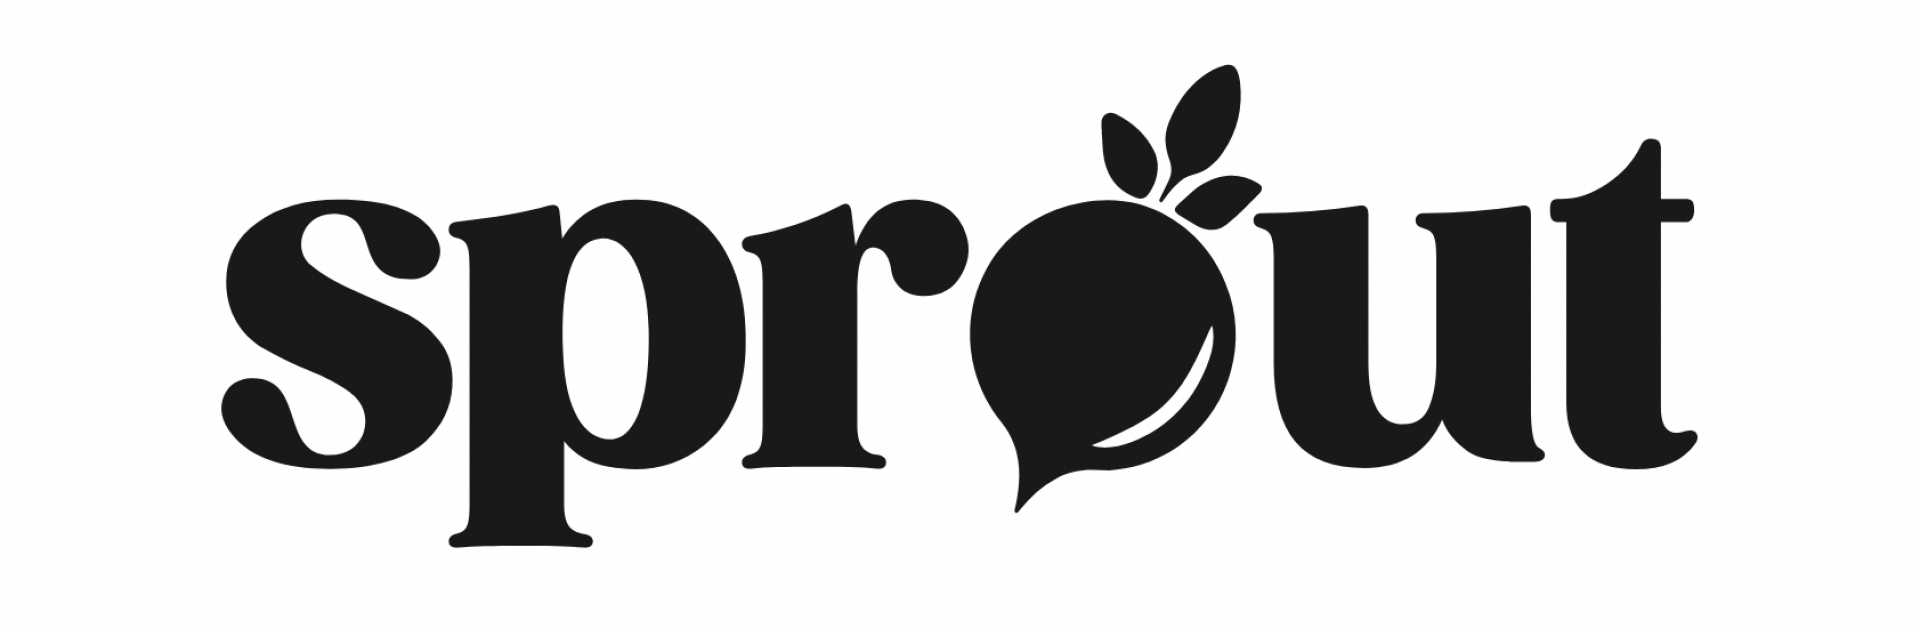 Sprout Society logo